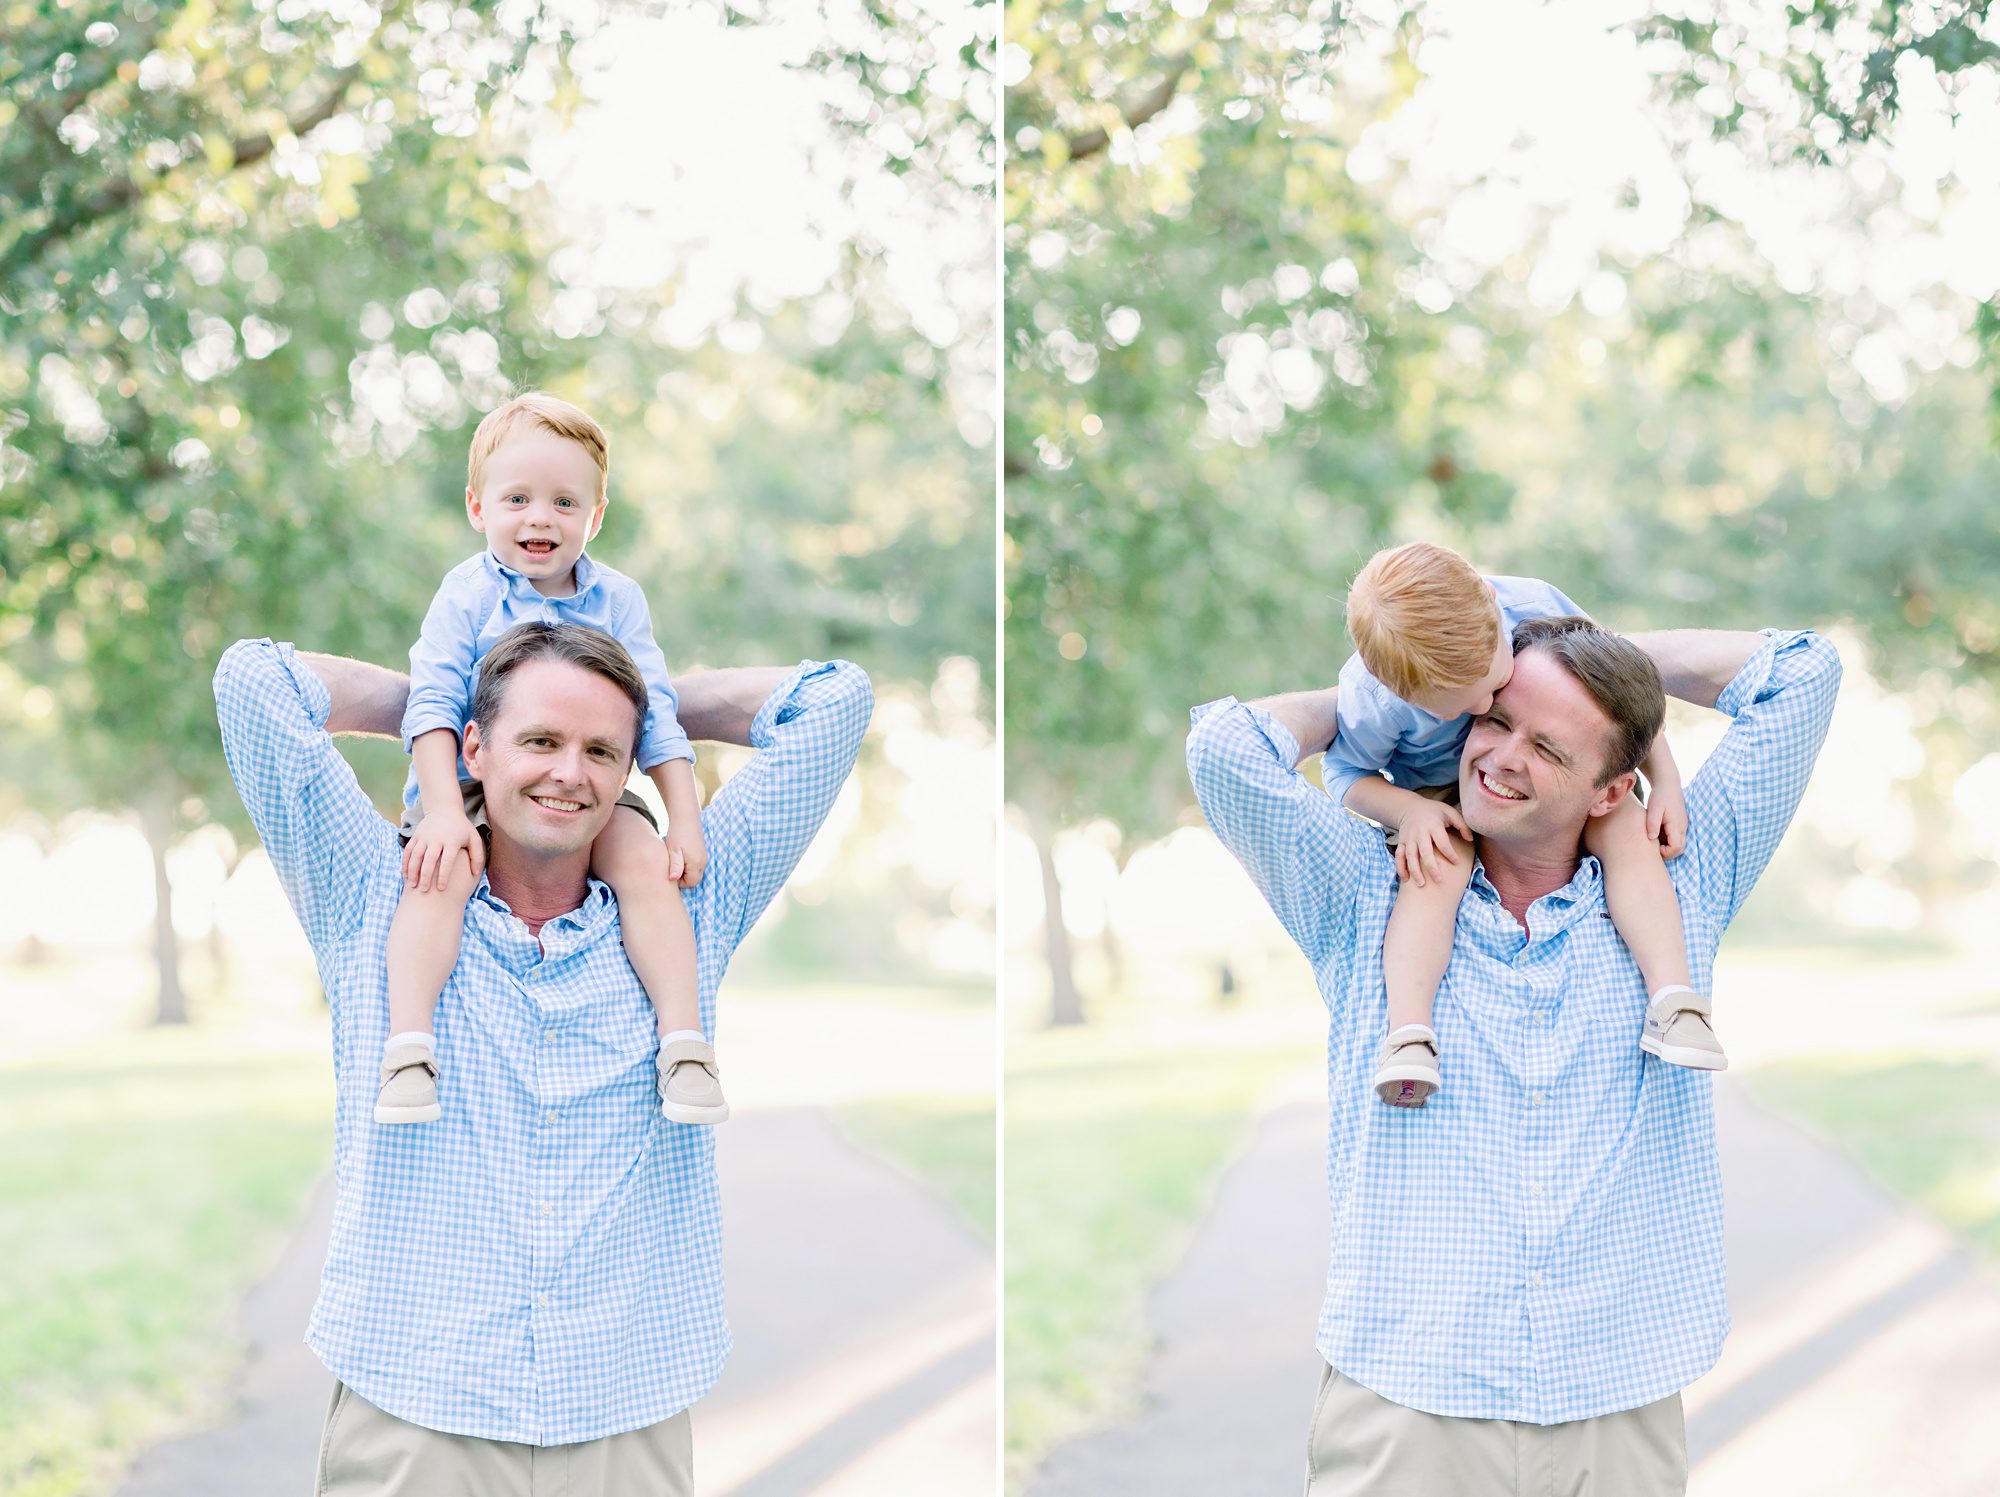 Adorable family of 4 gets portraits done at sunset in a park with pretty trees. 